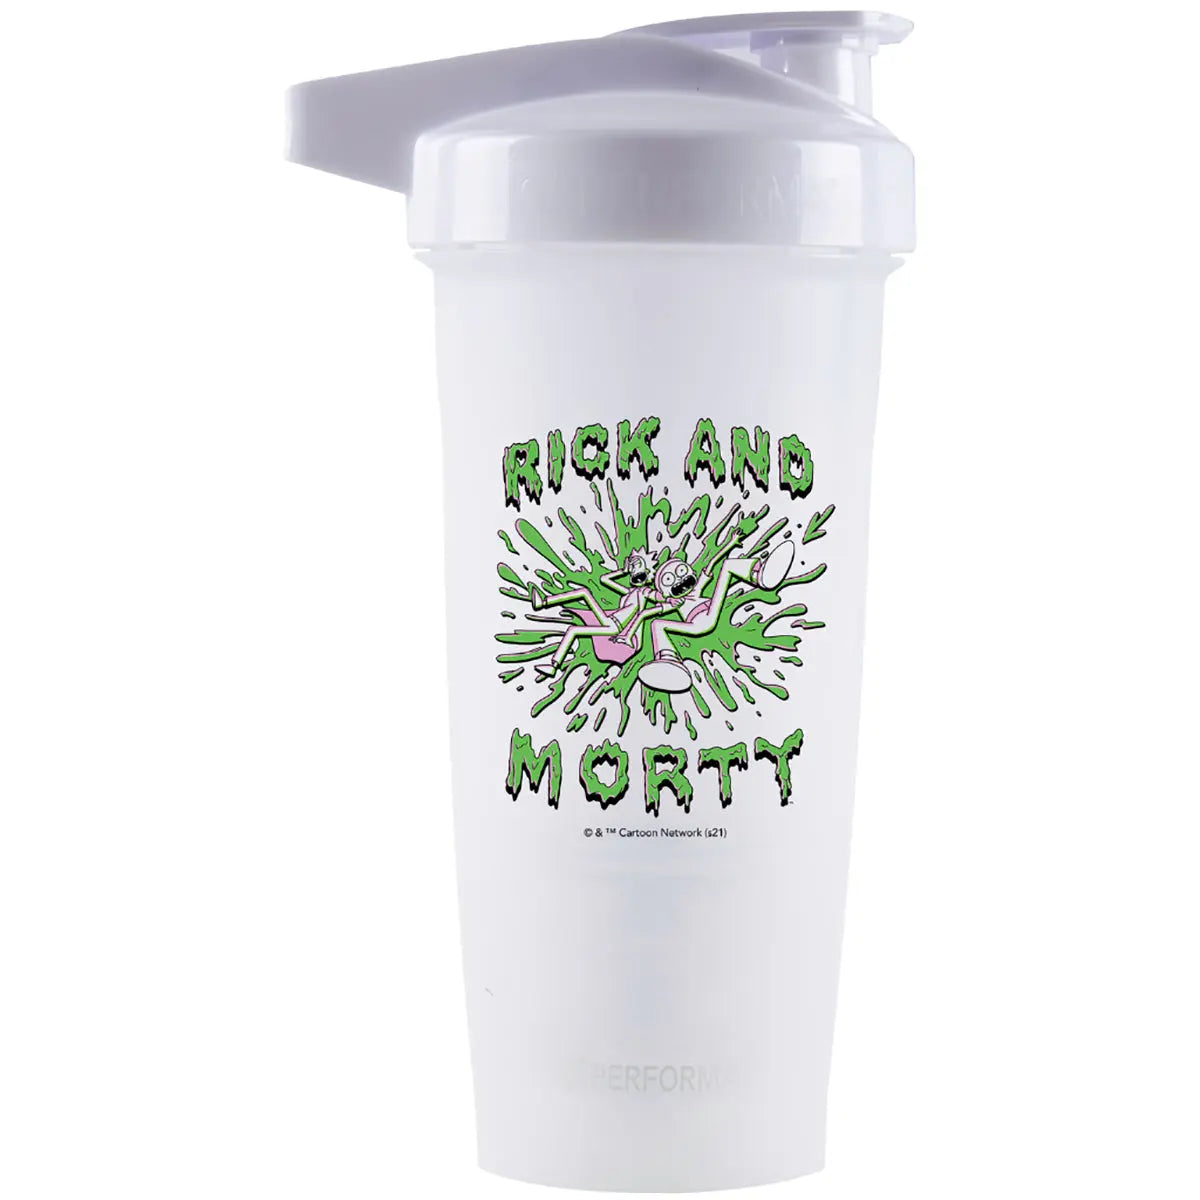 Performa Activ 28 oz. Shaker Mixer Cup - Rick and Morty Performa